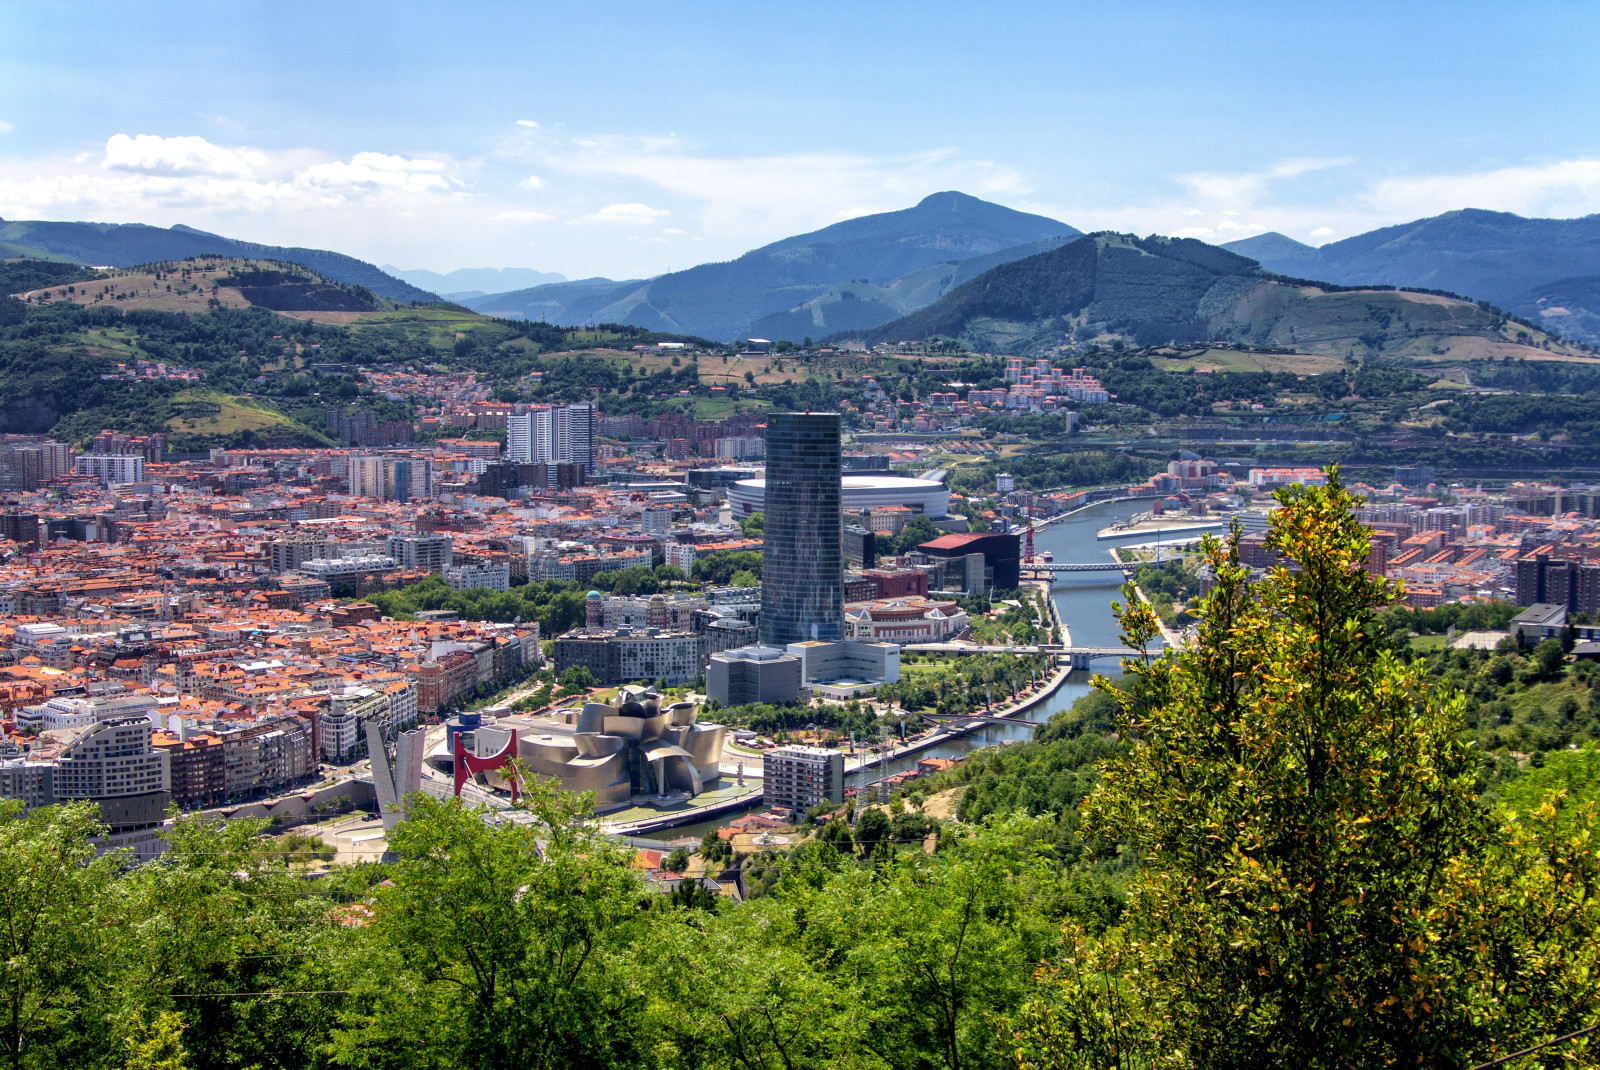 View of buildings and houses with mountains in the background in Bilbao, Spain 